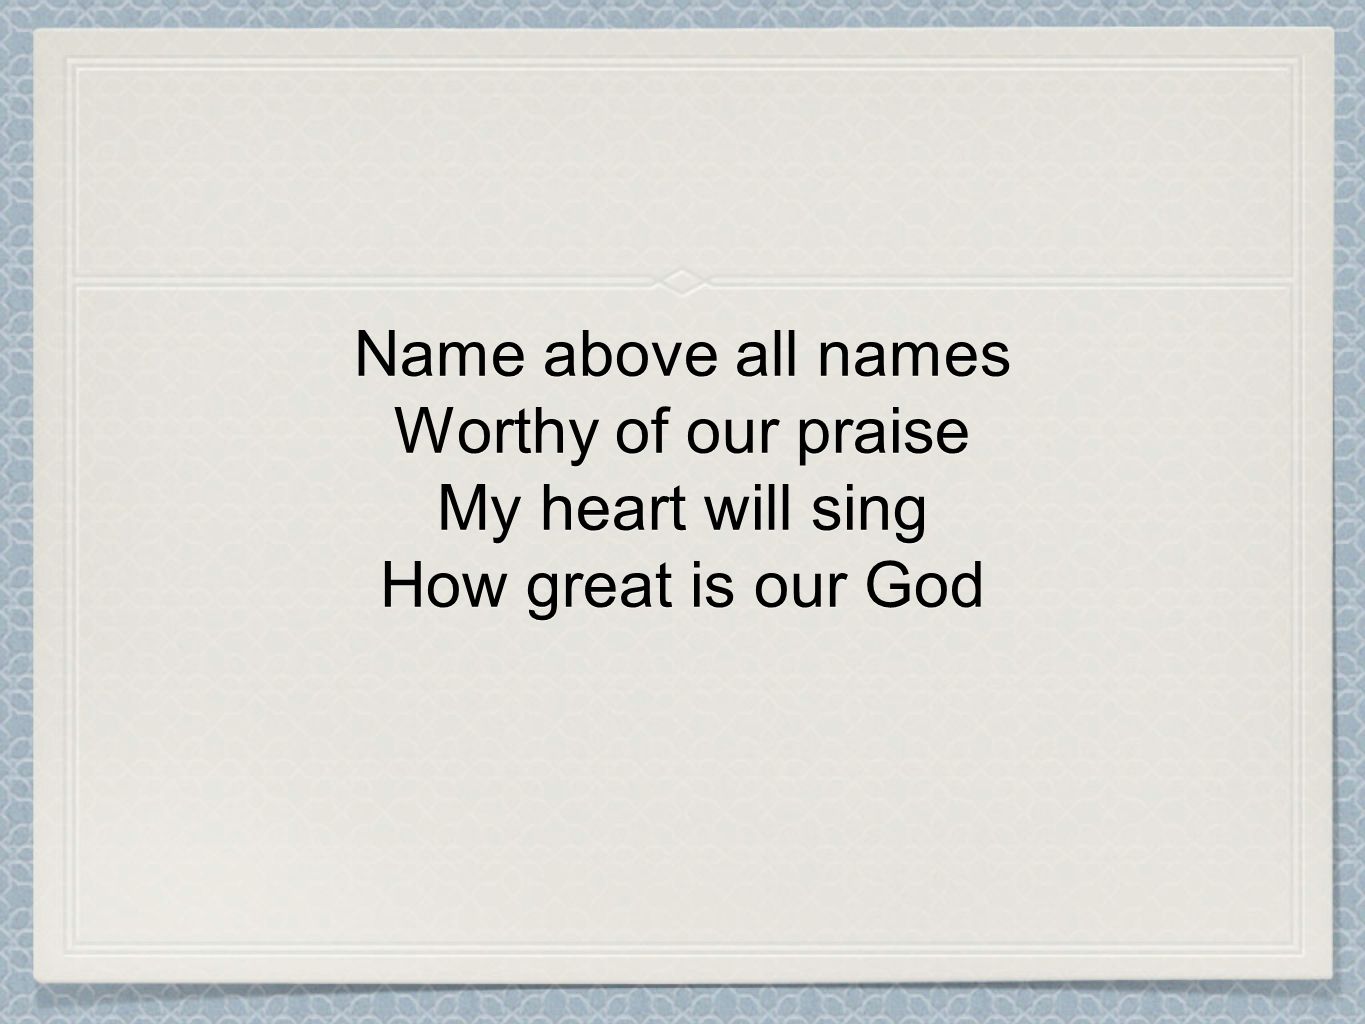 Name above all names Worthy of our praise My heart will sing How great is our God